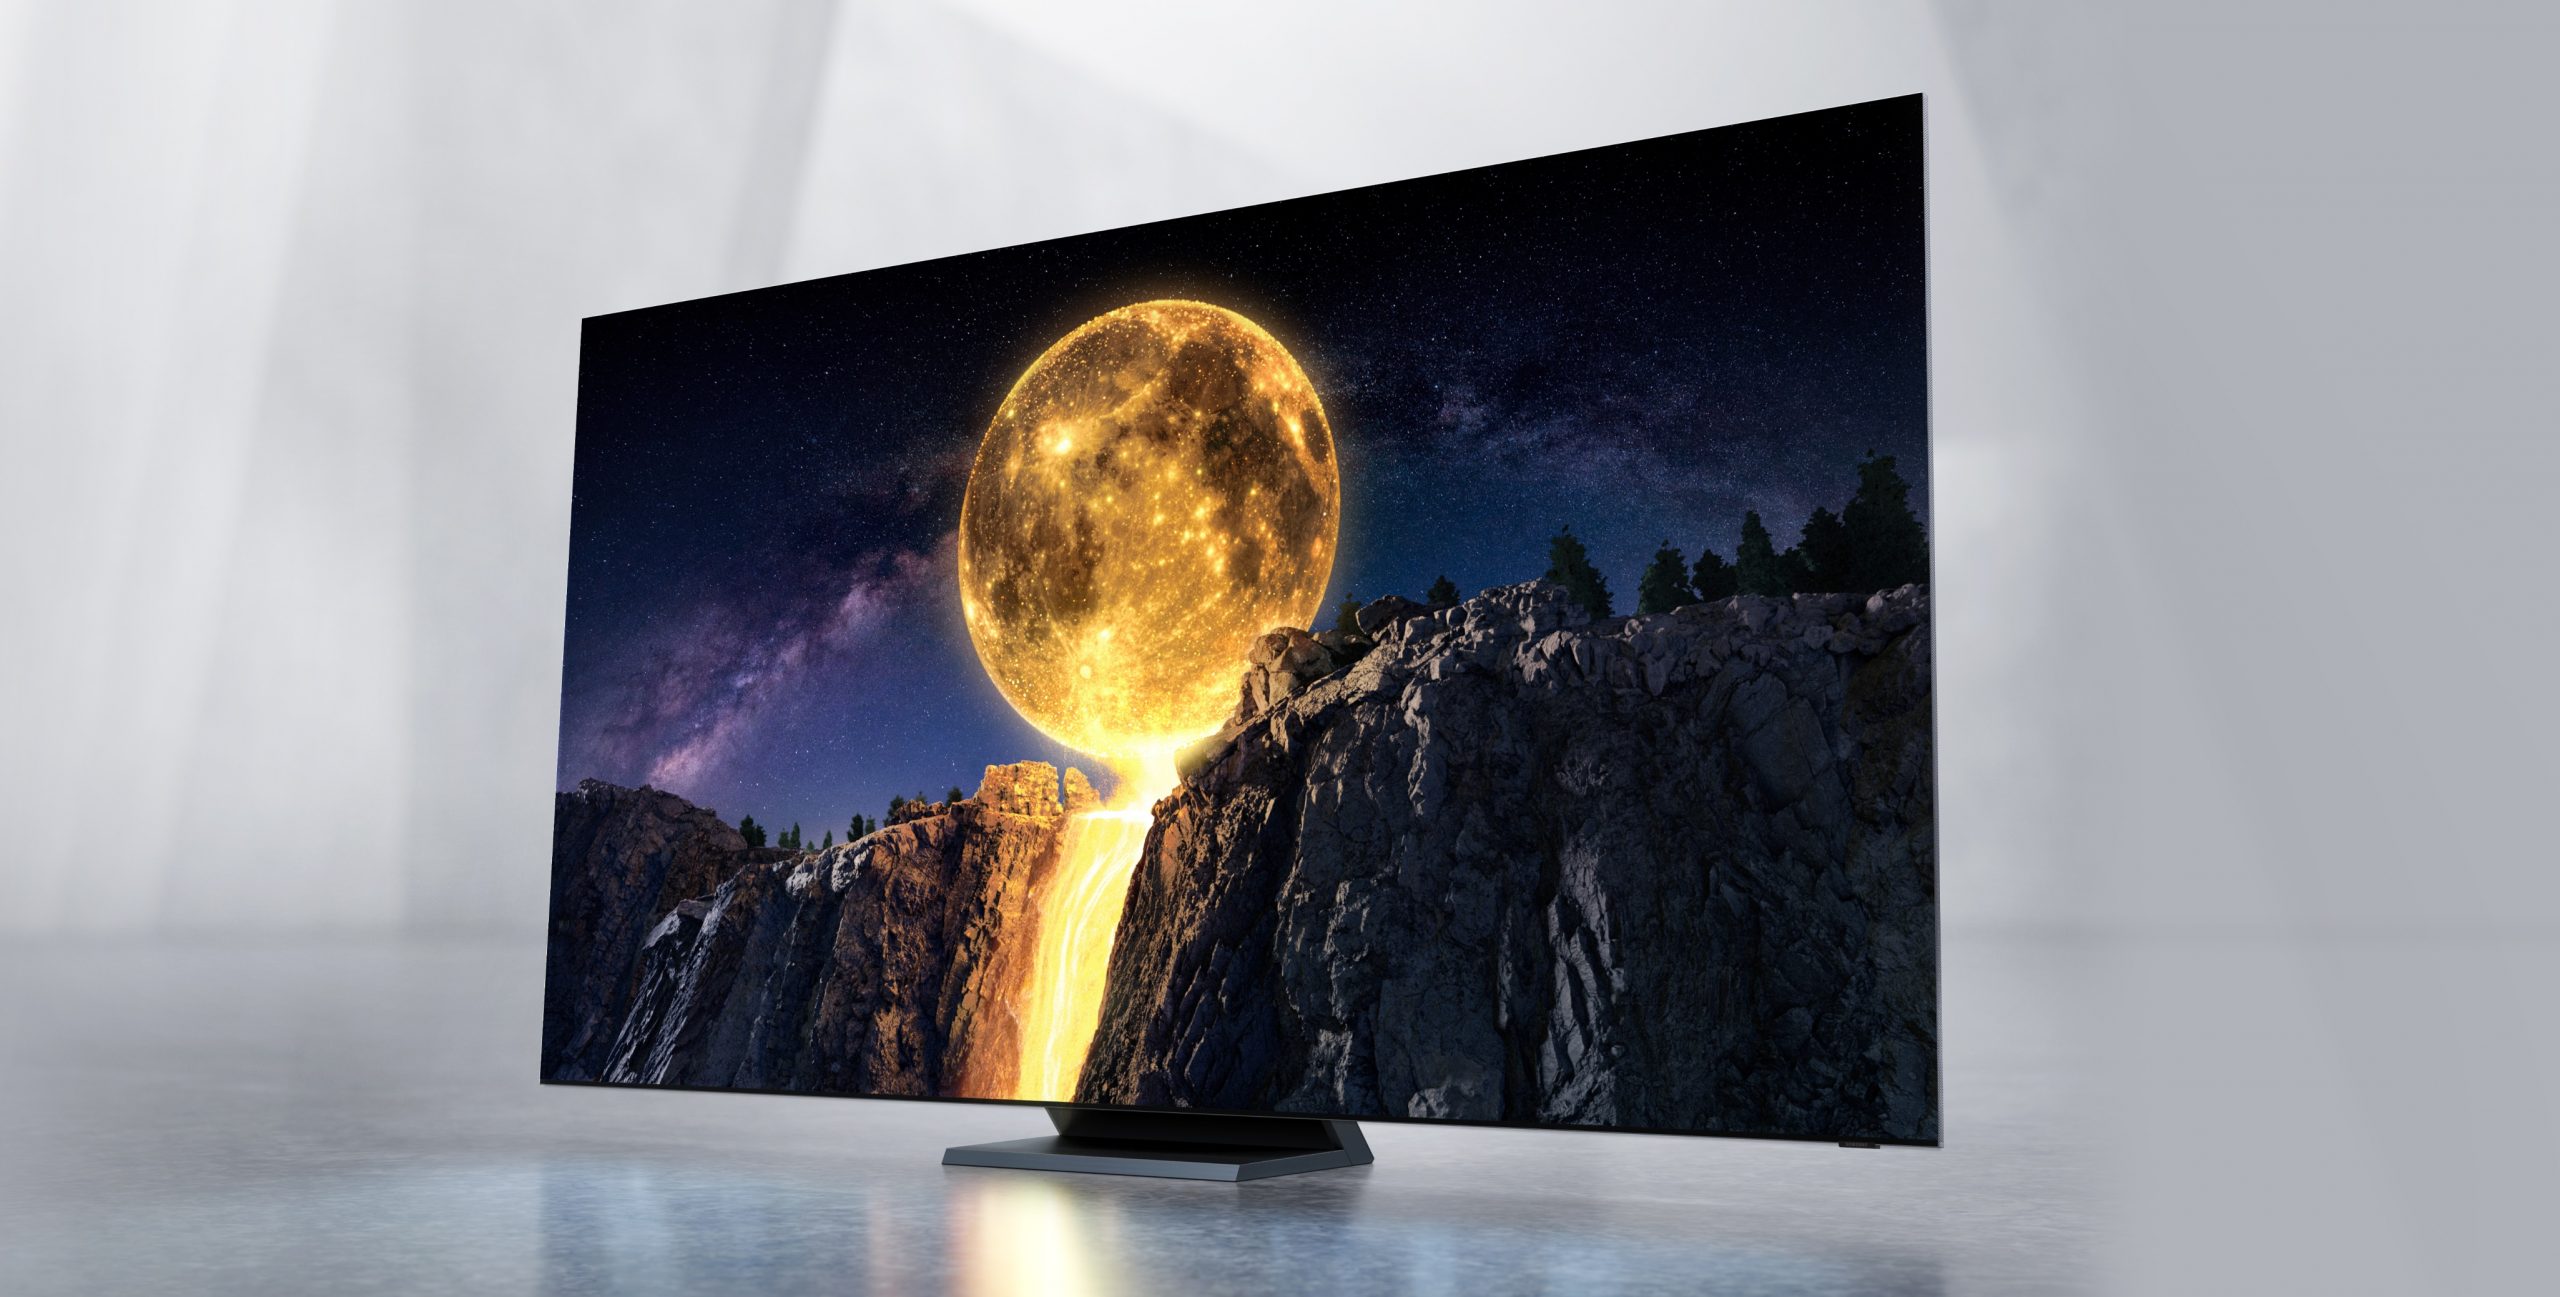 How Samsung TVs Have Reimagined Traditional Cinema Viewing Experiences